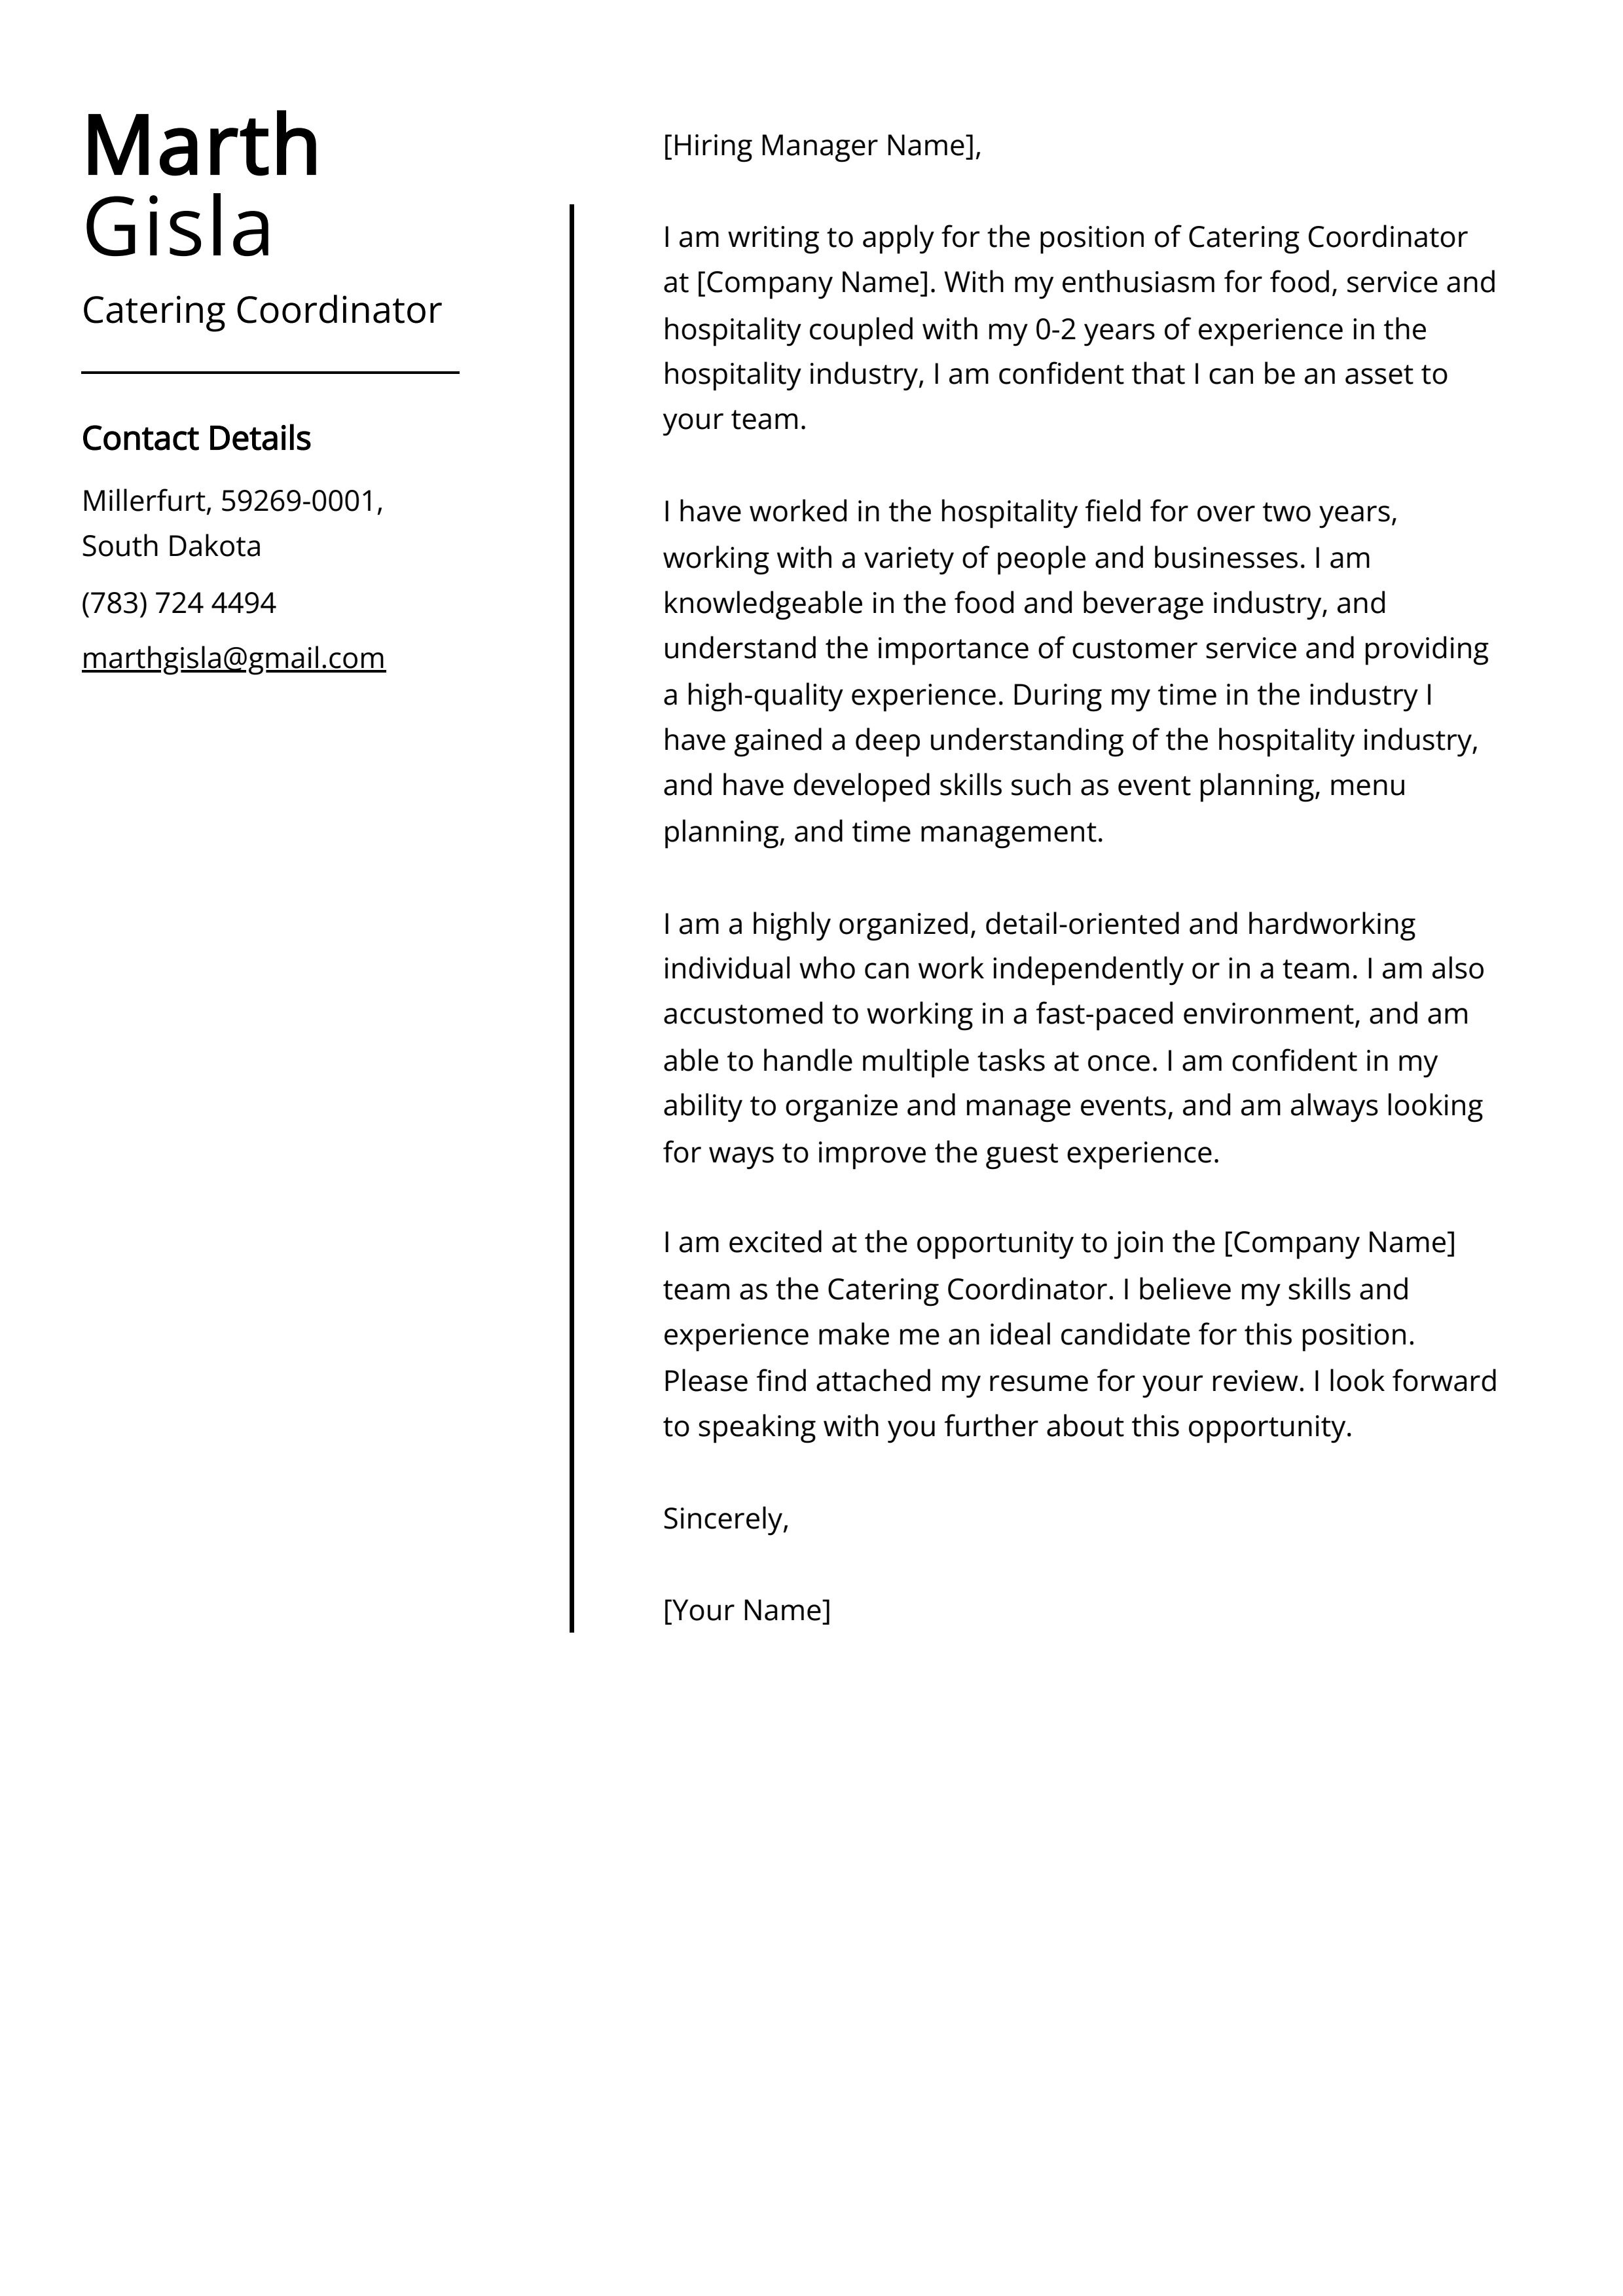 Catering Coordinator Cover Letter Example